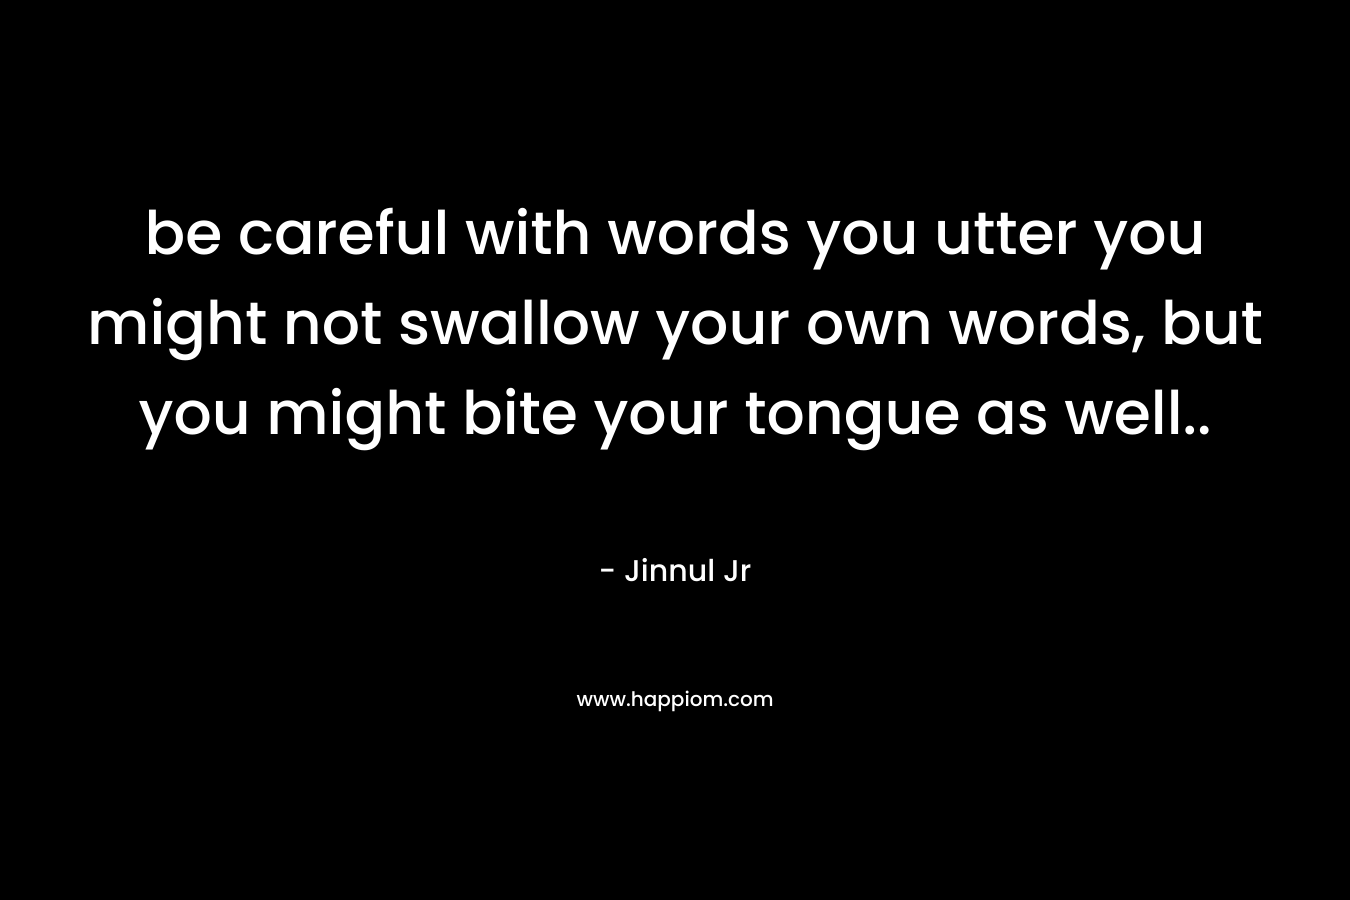 be careful with words you utter you might not swallow your own words, but you might bite your tongue as well..